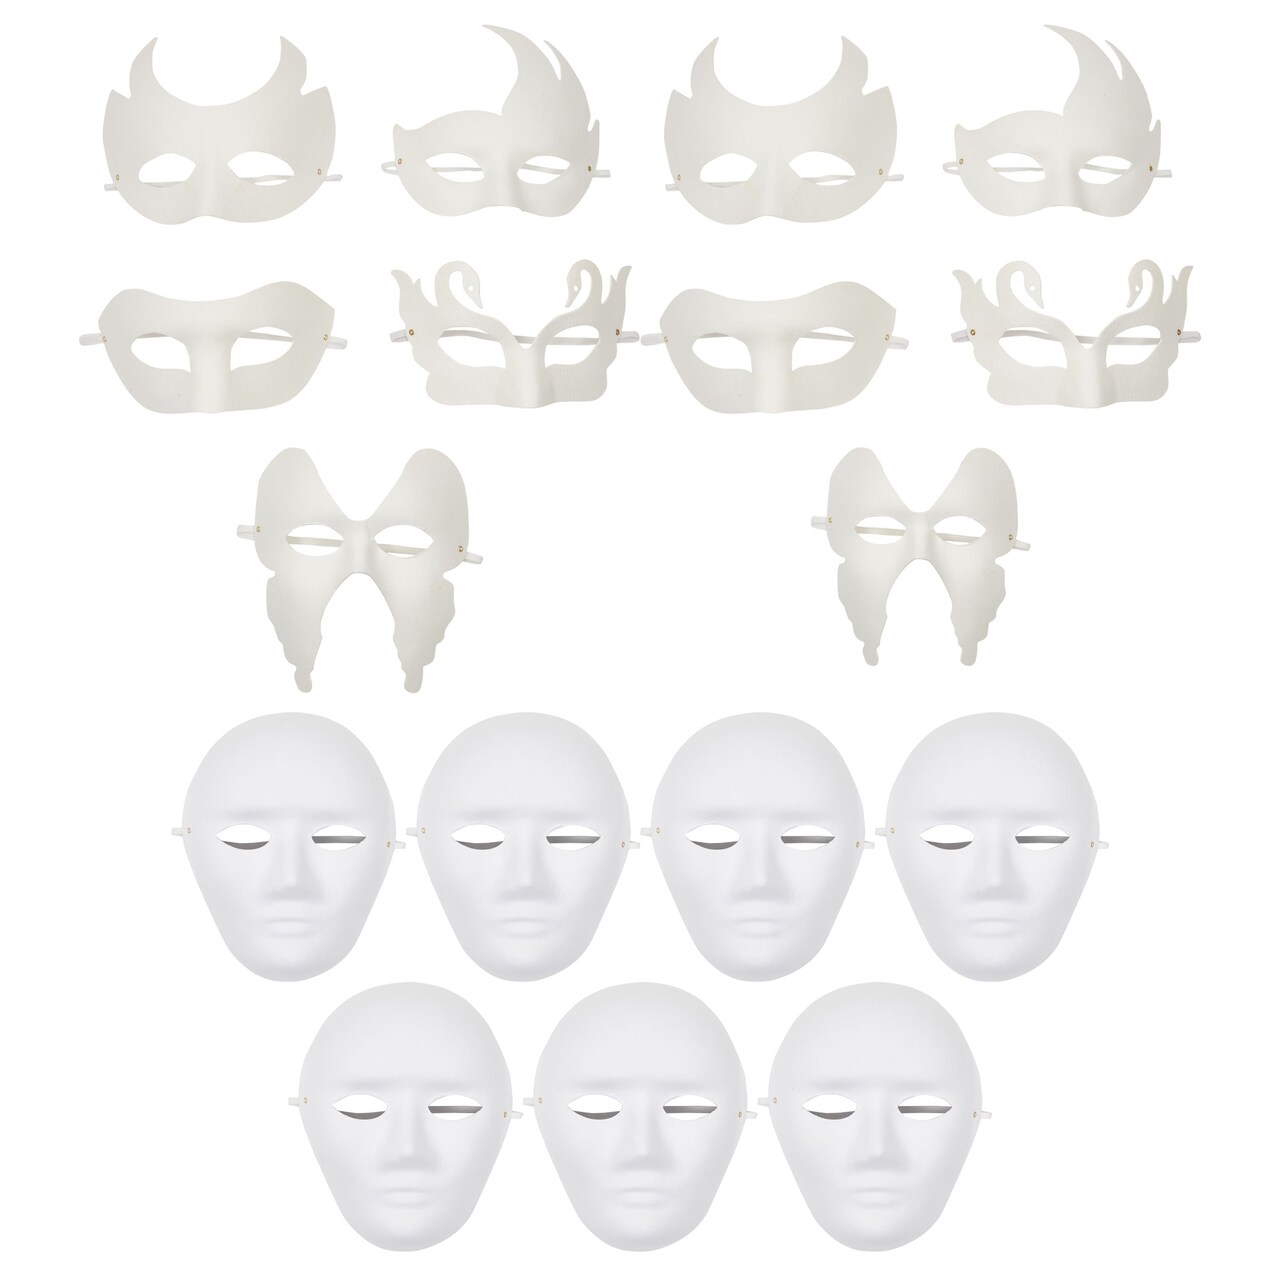 Paper Mache Masks for Mardi Gras Masquerade, 10 Blank Designs for  Decorating (16 Pack)